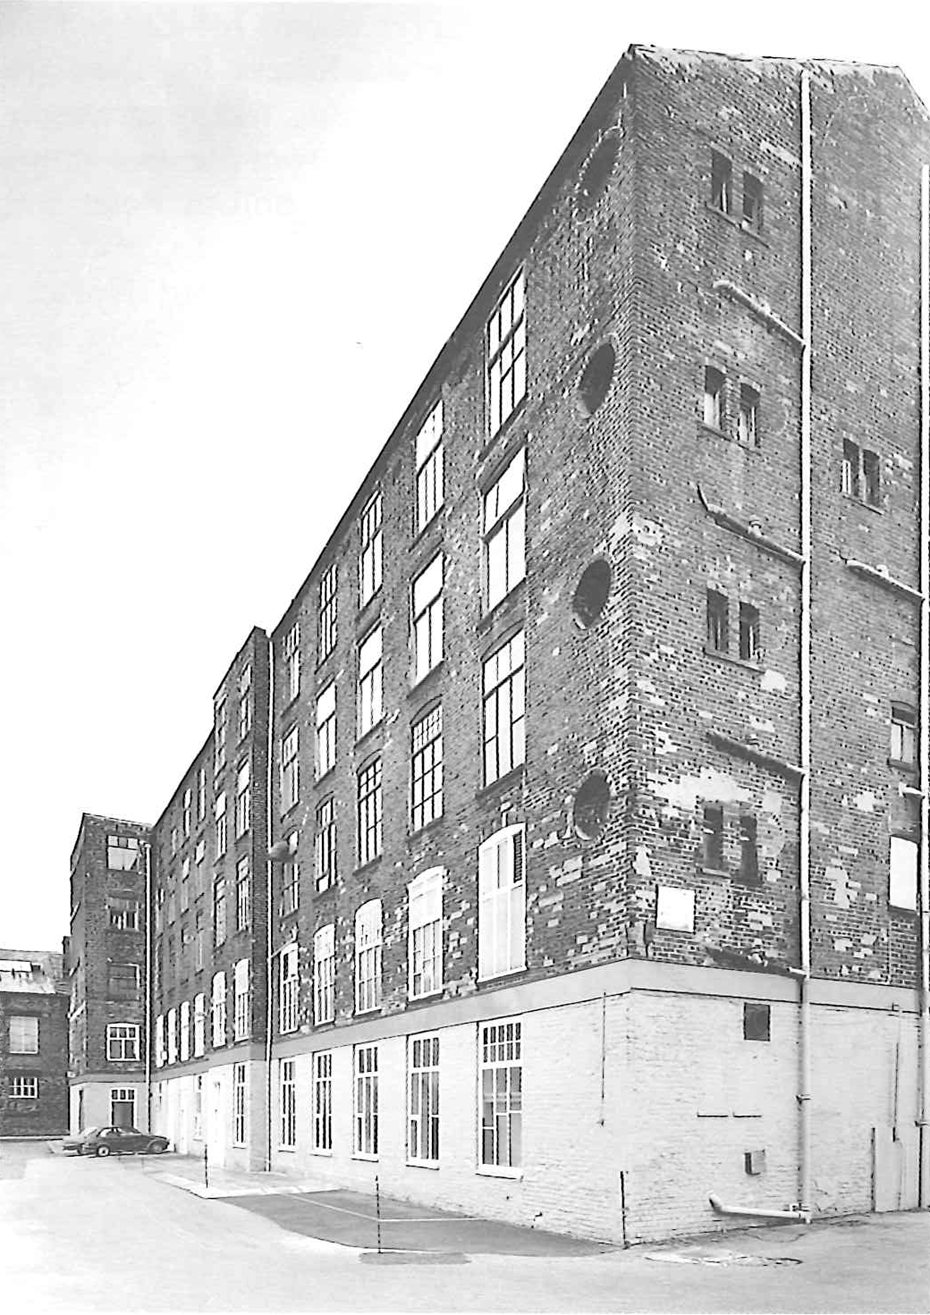 Image of Marshall's Mill, Holbeck, West Yorkshire